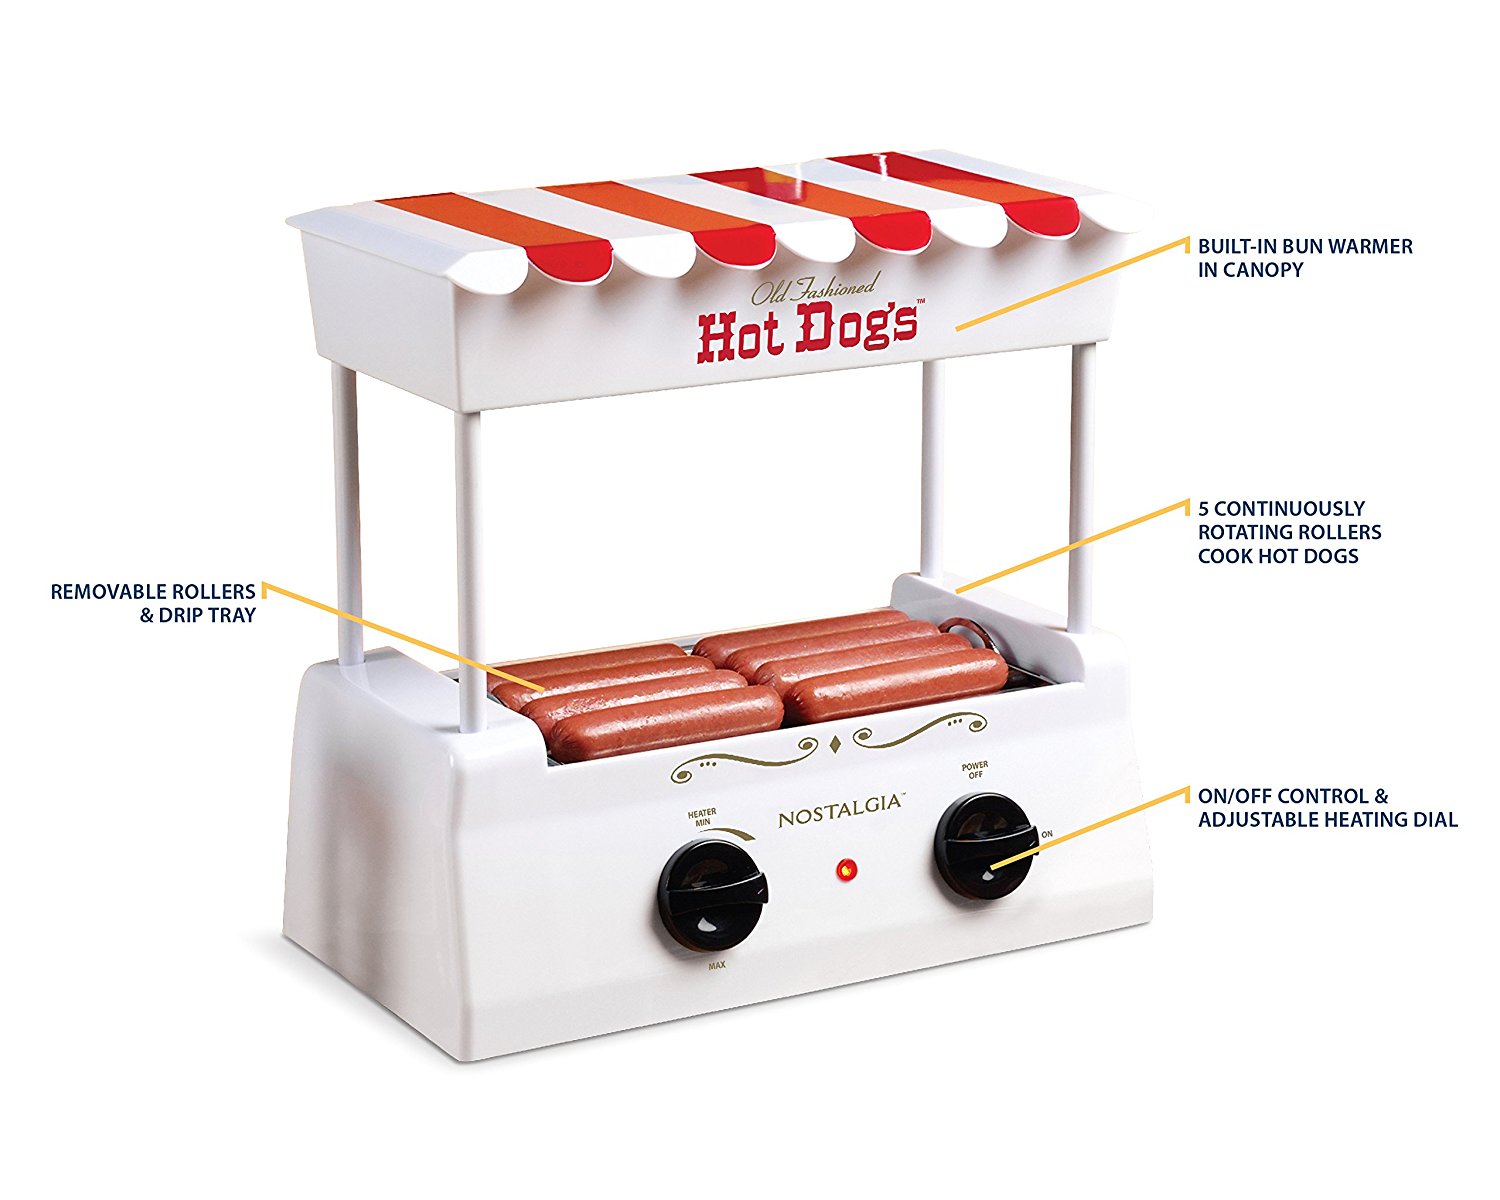 Nostalgia HDR565 Countertop Hot Dog Roller and Warmer, 8 Regular Sized or 4 Foot Long Hot Dogs and 6 Bun Capacity – White - image 2 of 4